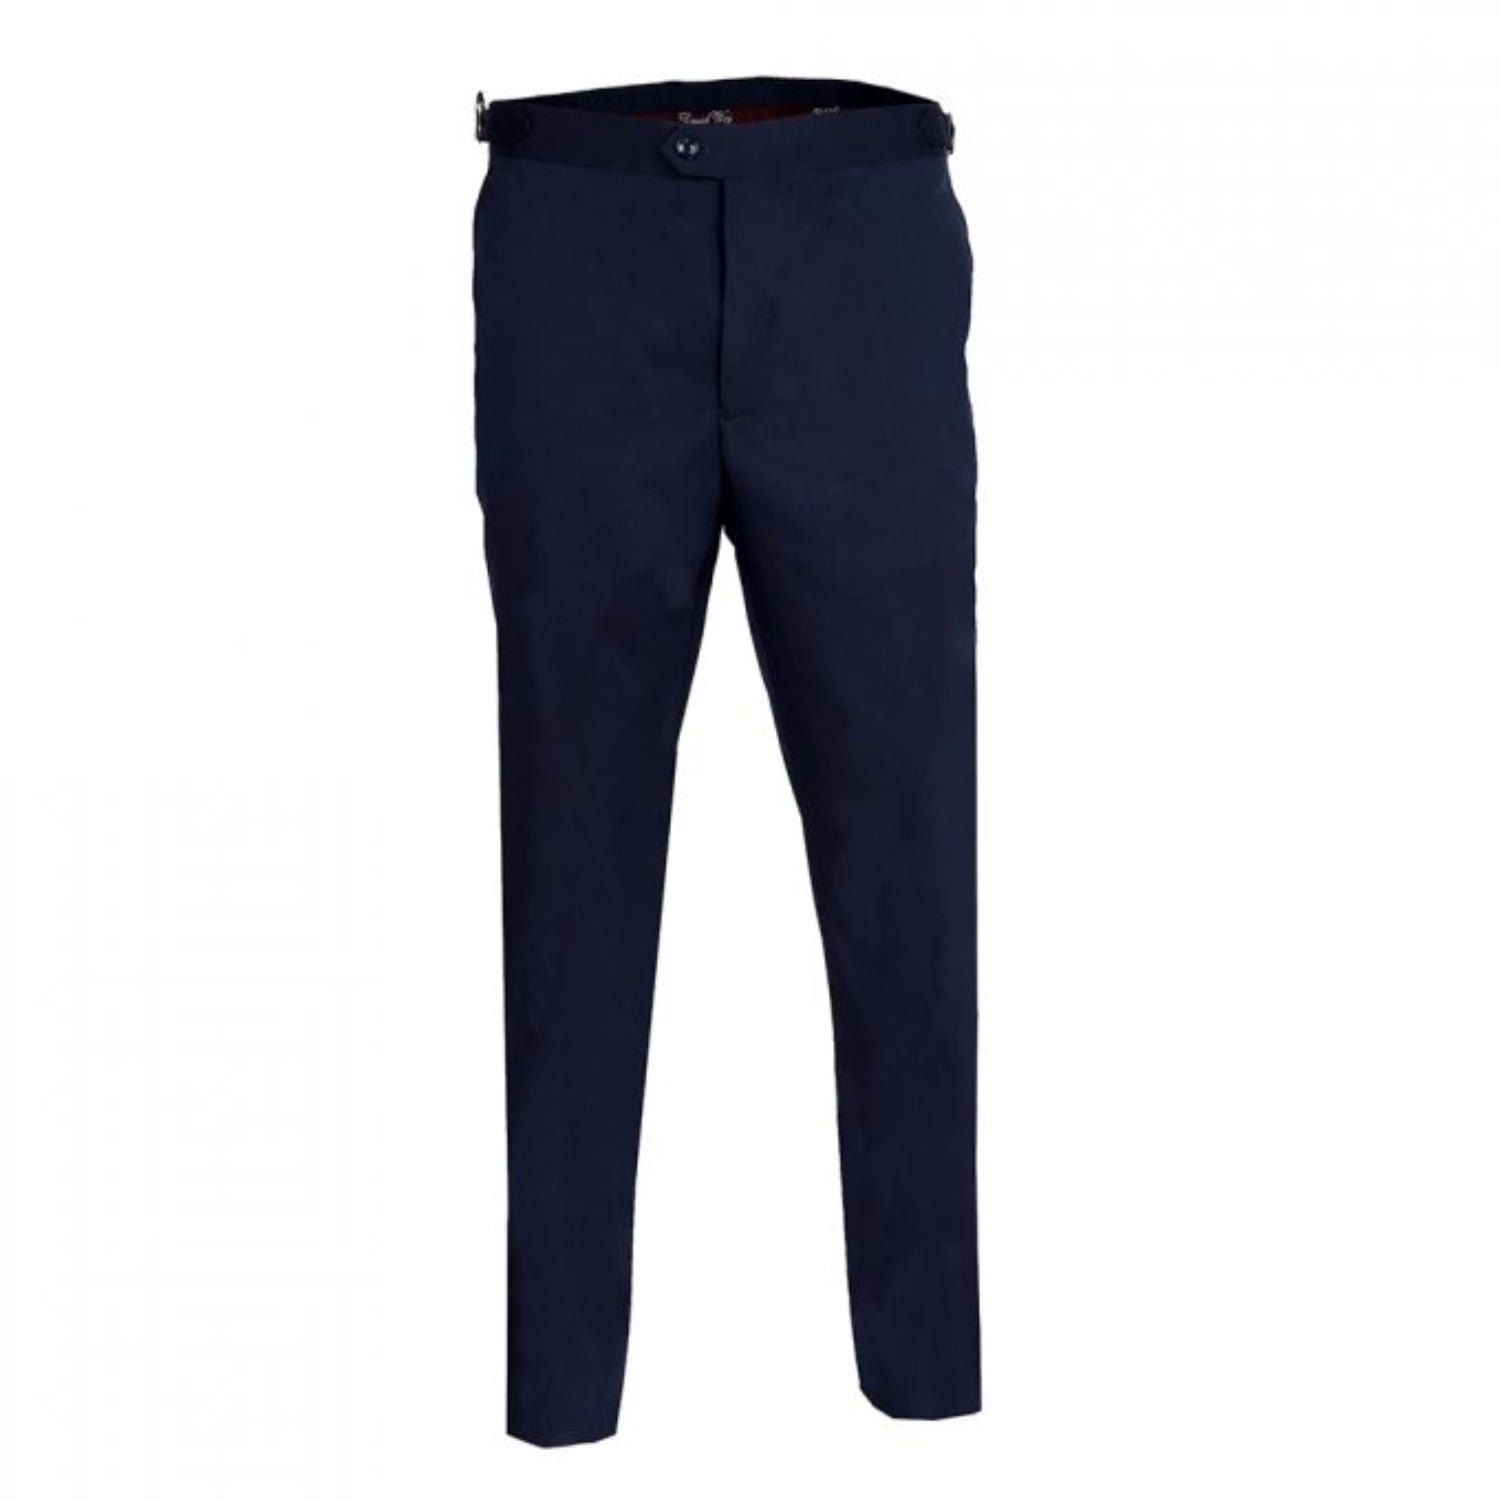 Men’s Blue Plain Dress Trousers With Side Adjusters - Navy 34" David Wej